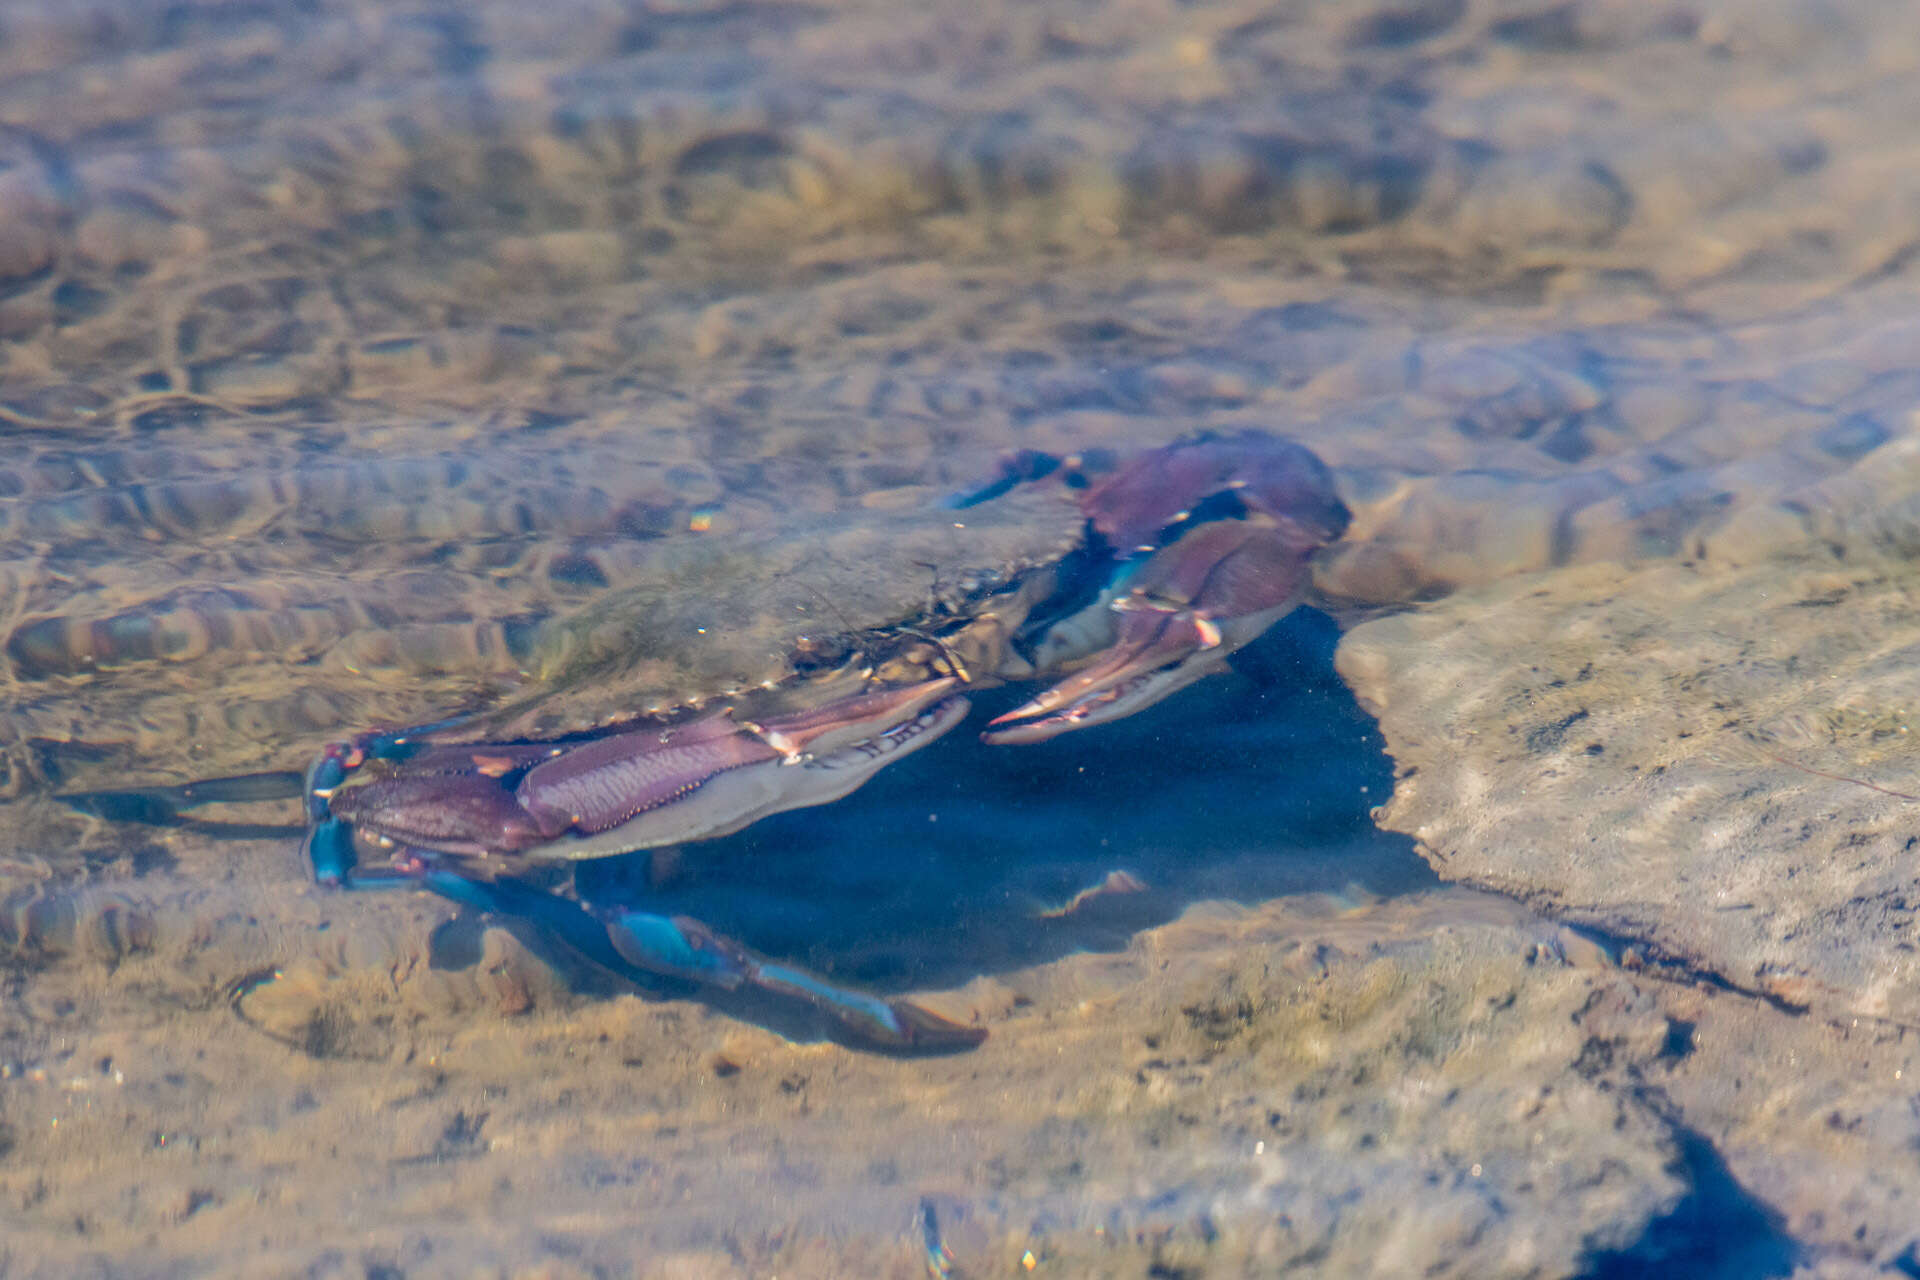 Image of arched swimming crab